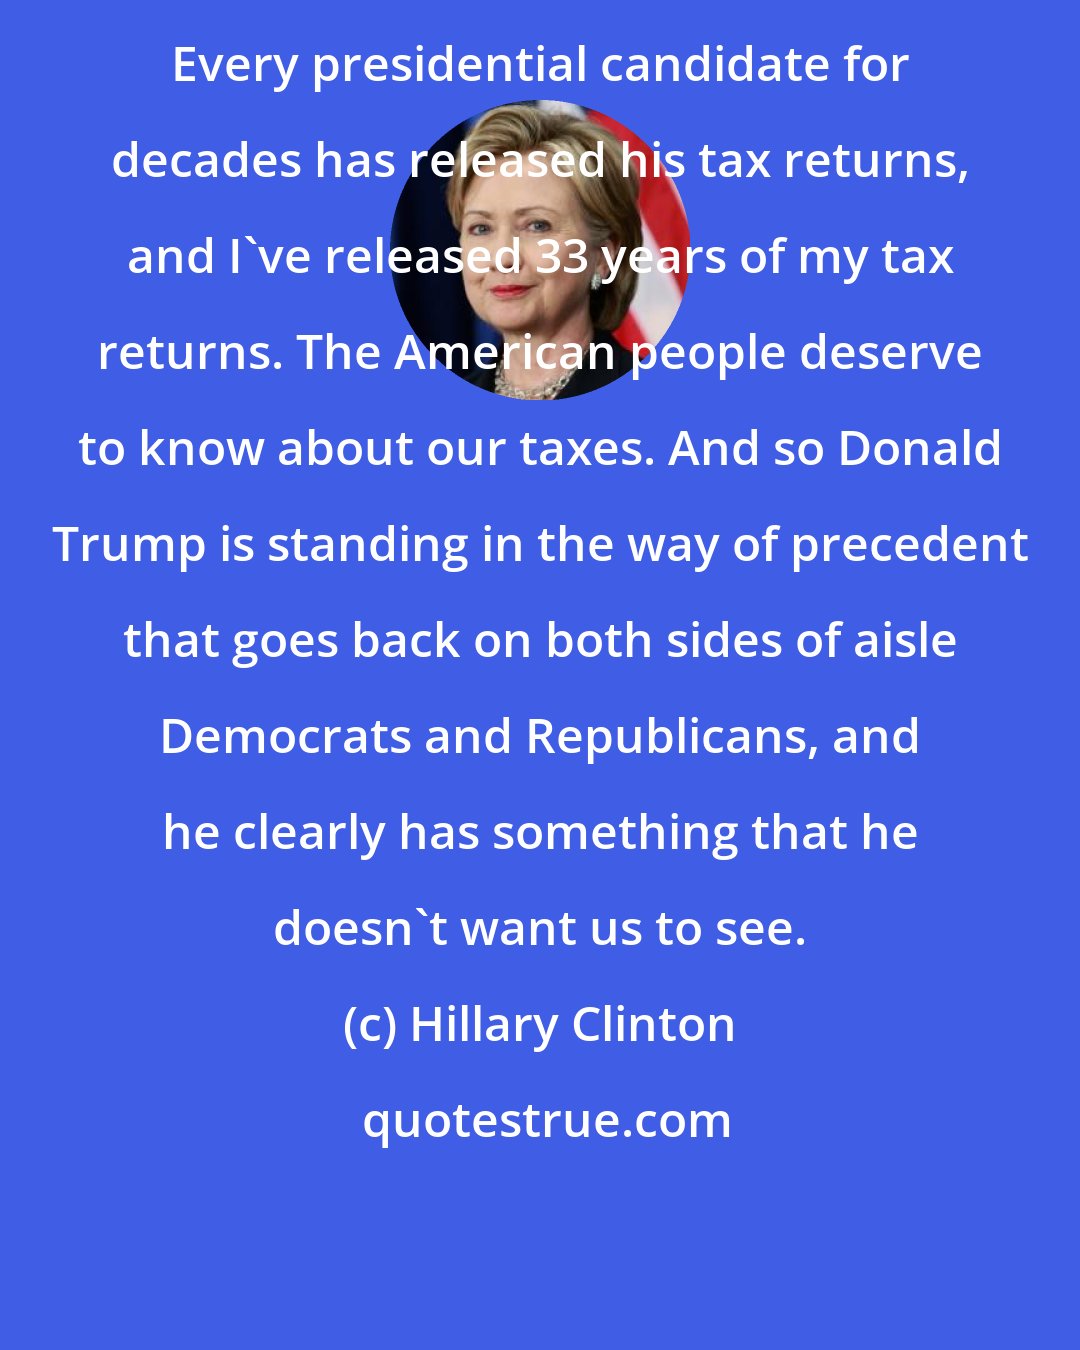 Hillary Clinton: Every presidential candidate for decades has released his tax returns, and I've released 33 years of my tax returns. The American people deserve to know about our taxes. And so Donald Trump is standing in the way of precedent that goes back on both sides of aisle Democrats and Republicans, and he clearly has something that he doesn't want us to see.